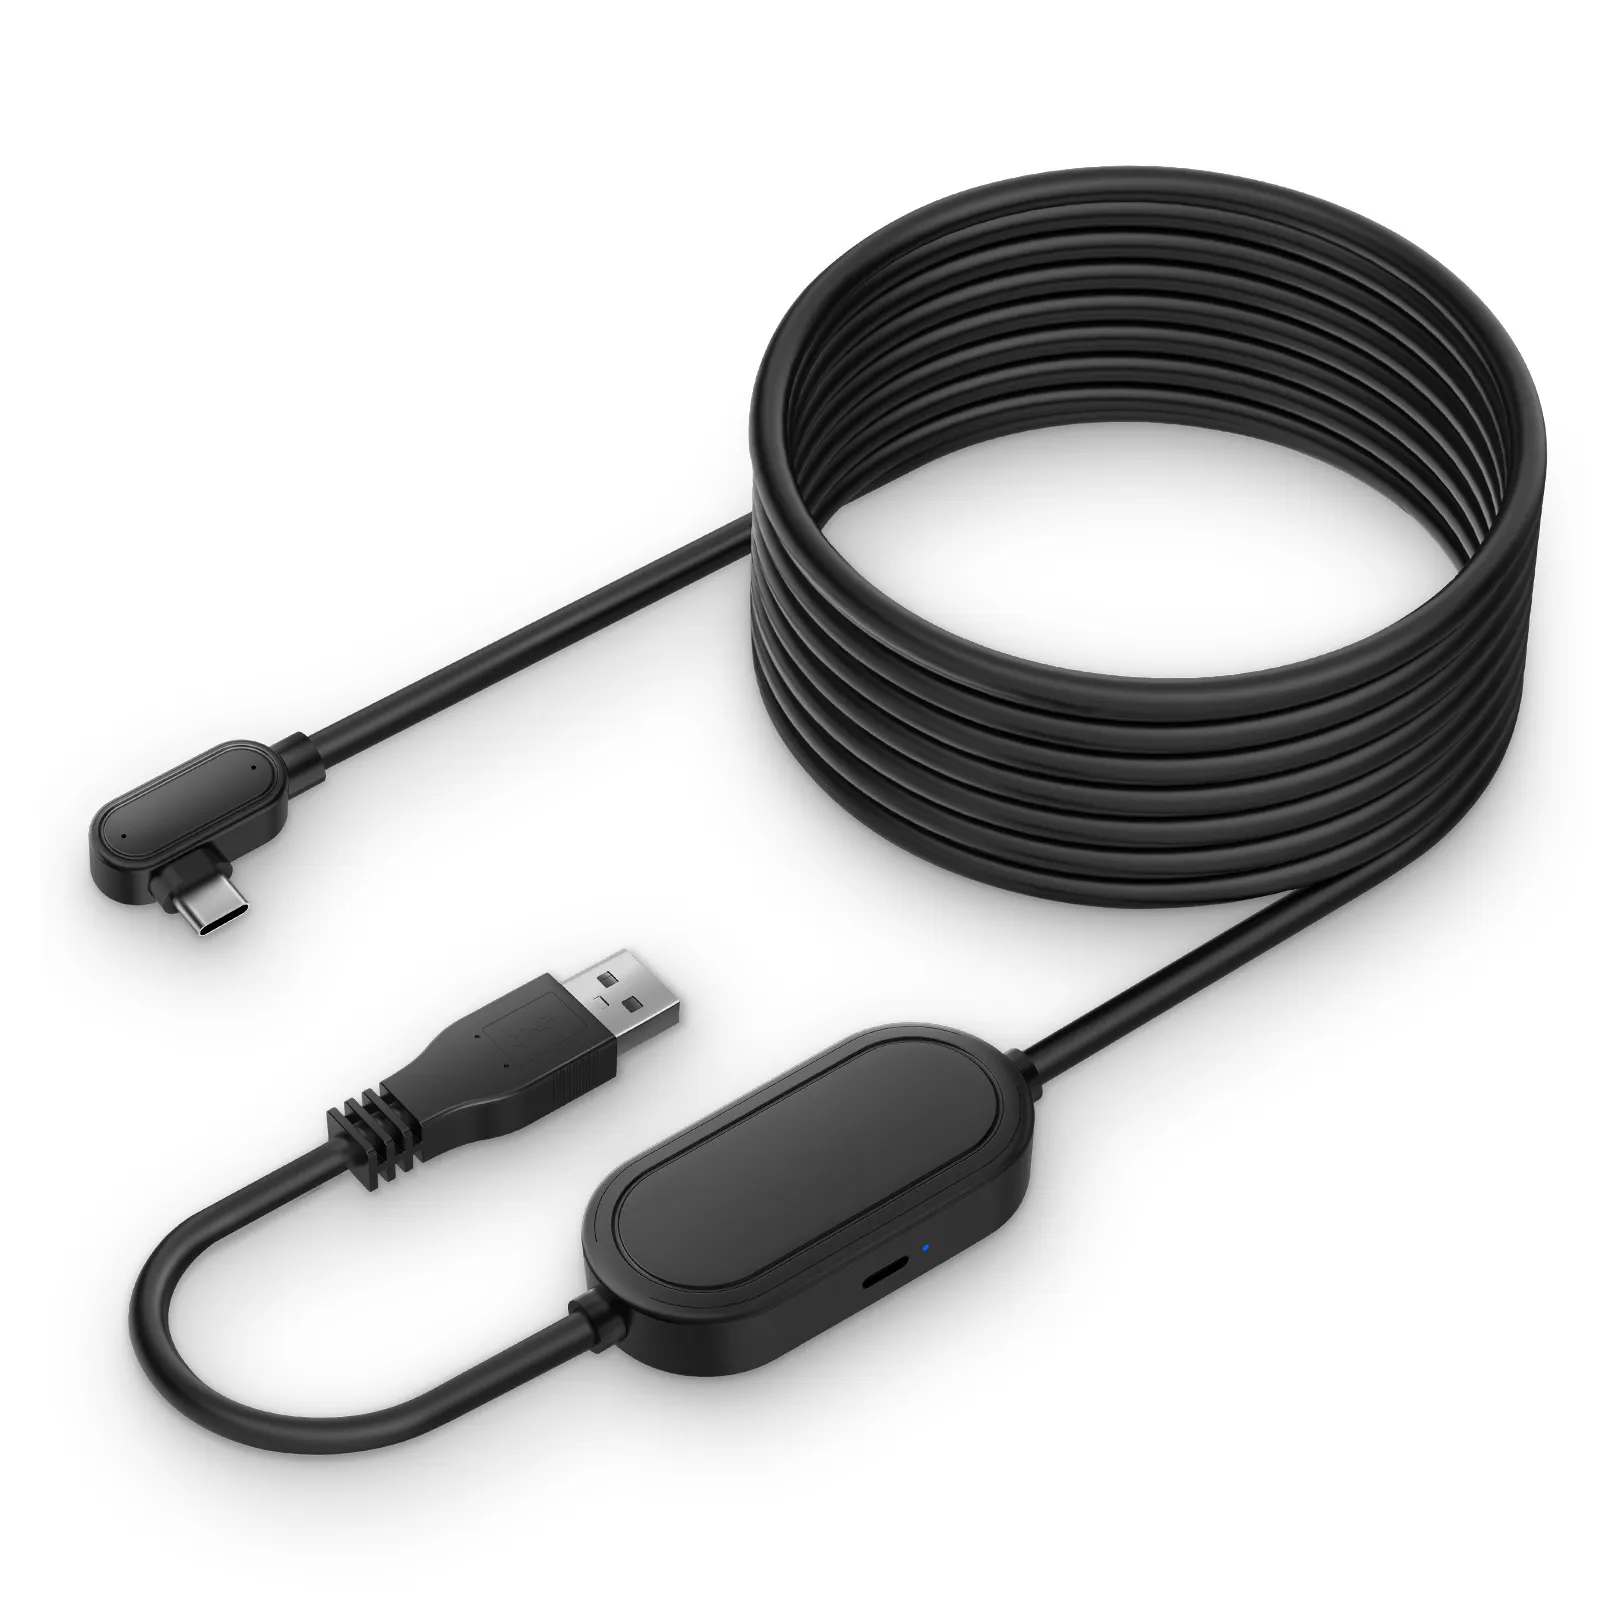 5 Meters High Speed Data Transfer Fast Charging Cable Link Vr Headset Usb 3.2 Gen1 Cable For Meta/Oculus Quest 2 Pro